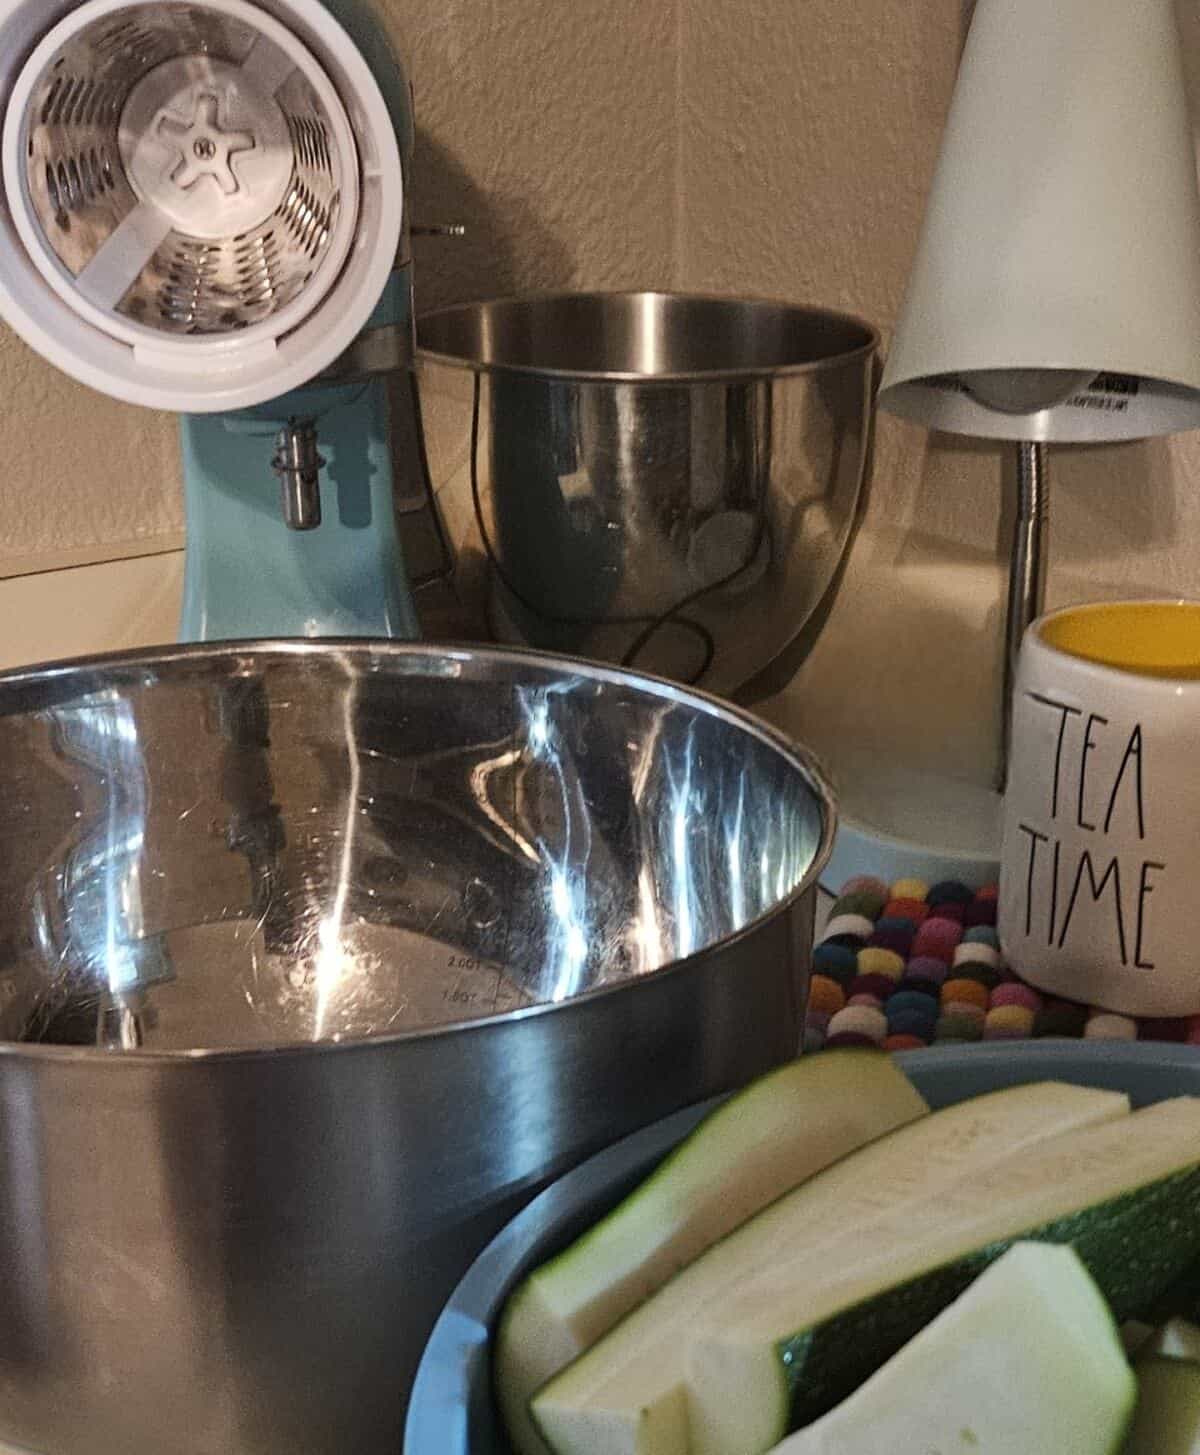 a kitchenaid mixer shown with the shredder wheel attachment, zucchini cut into wedges, ready to be shredded